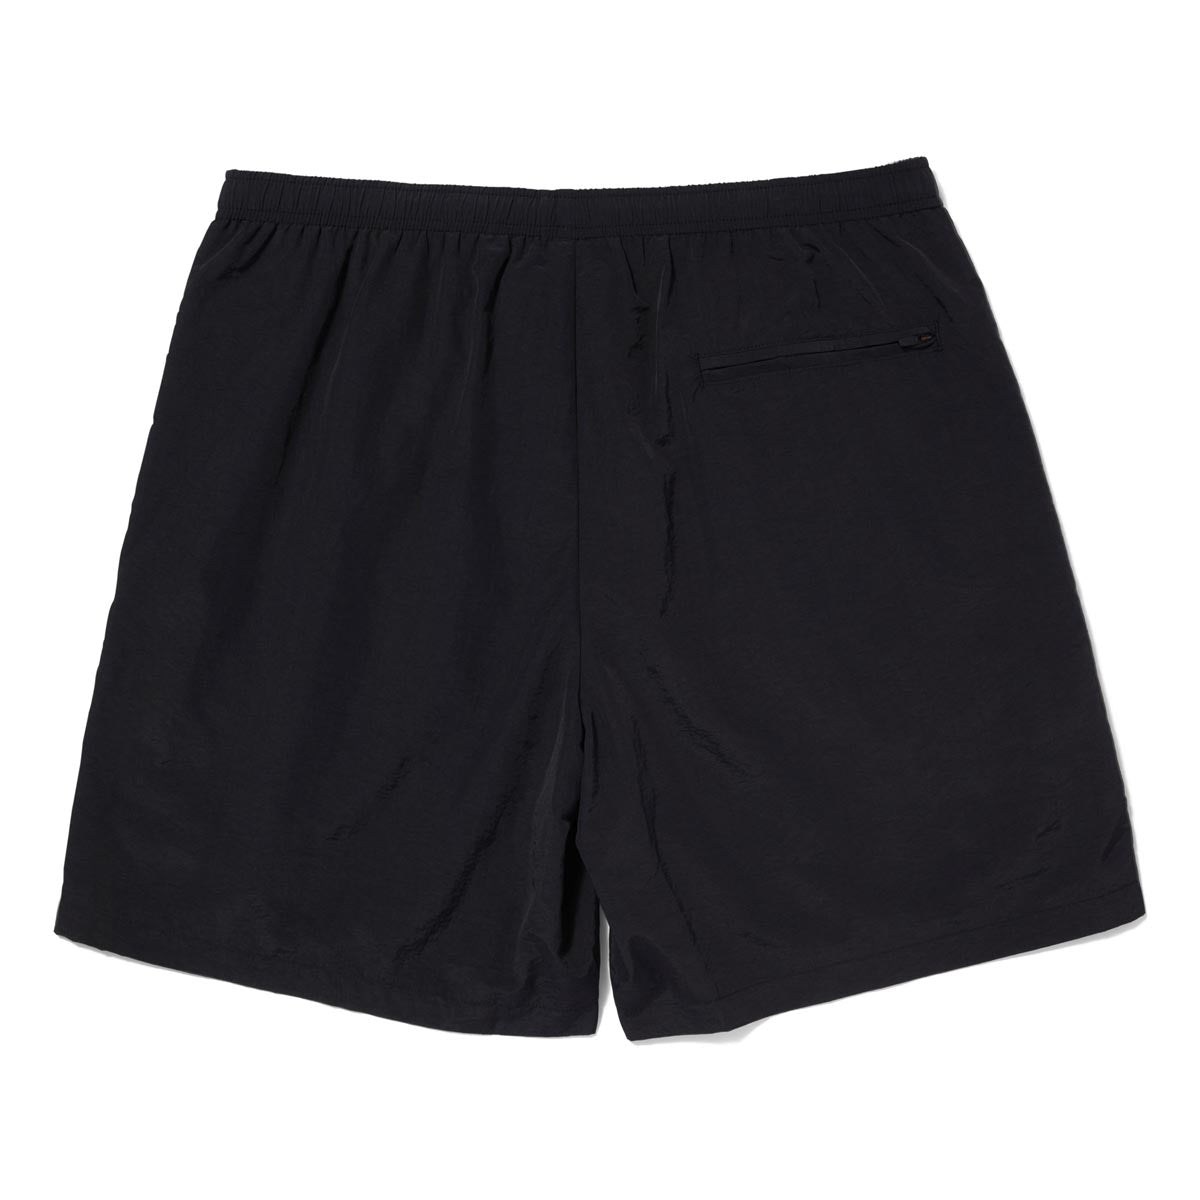 HUF Pacific Easy Shorts - Black image 2